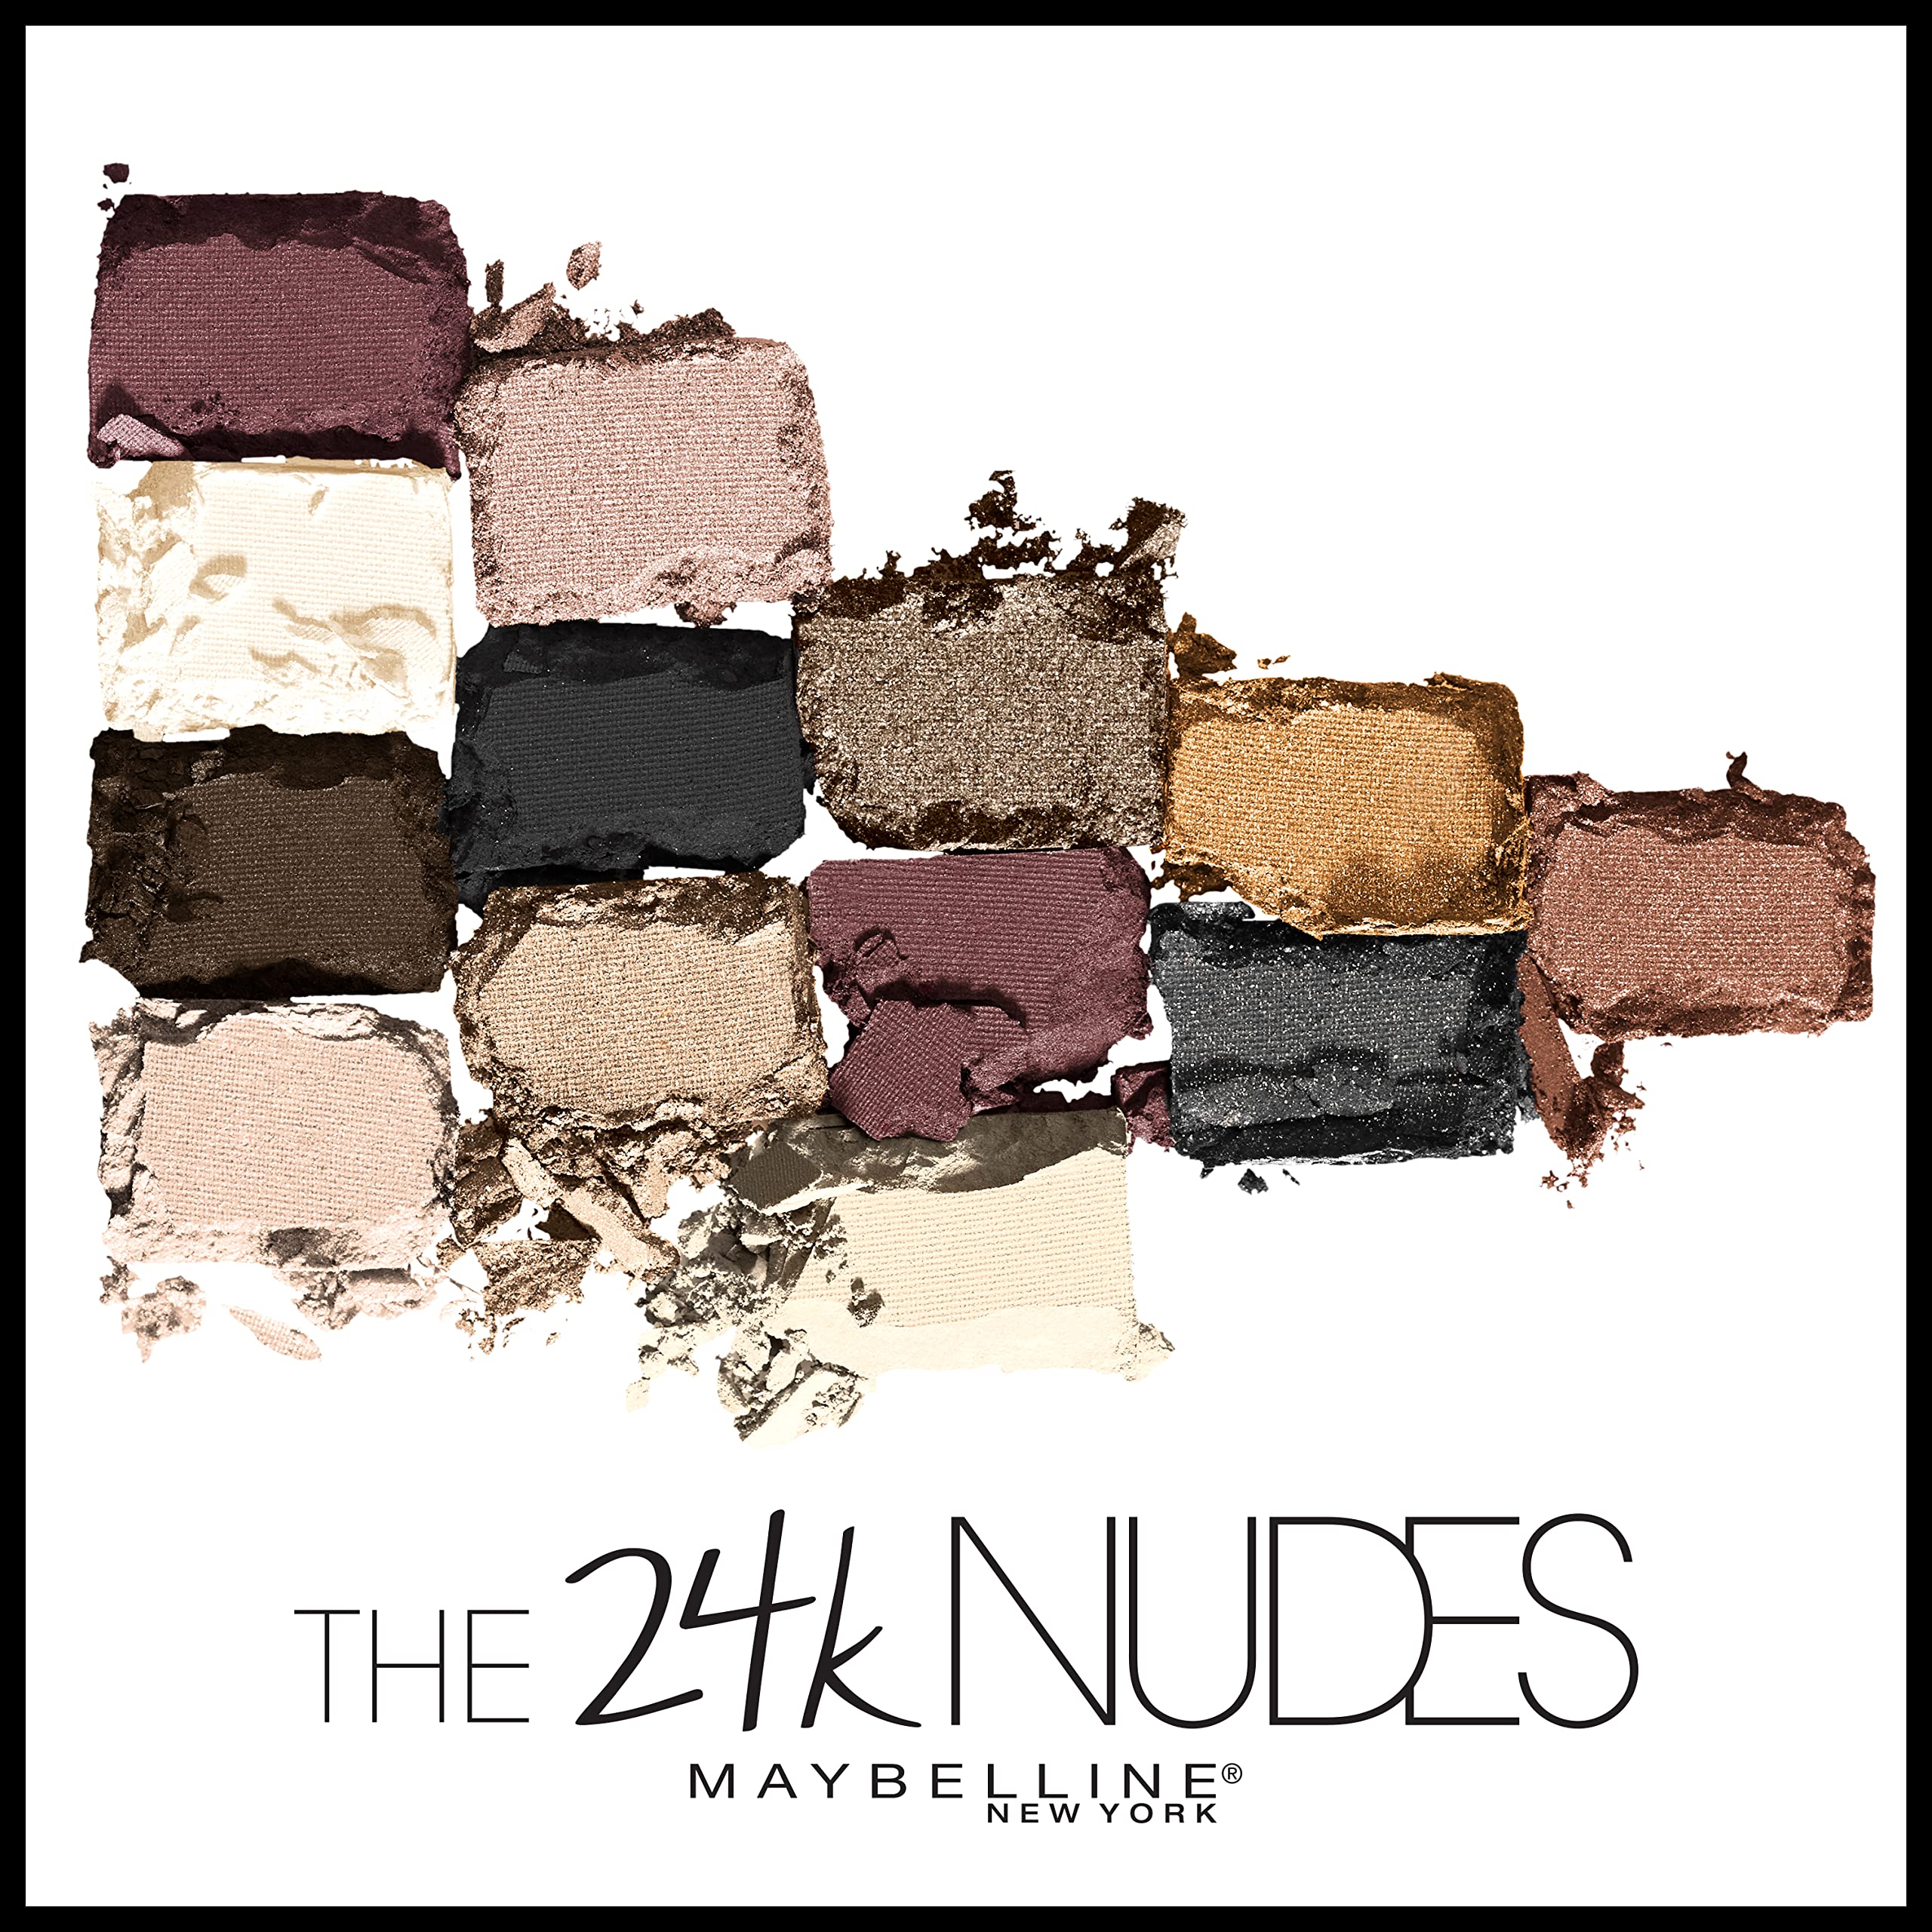 Maybelline The 24K Nudes Gold Eyeshadow Palette Makeup, 12 Pigmented Matte & Shimmer Shades, Blendable Powder, 1 Count